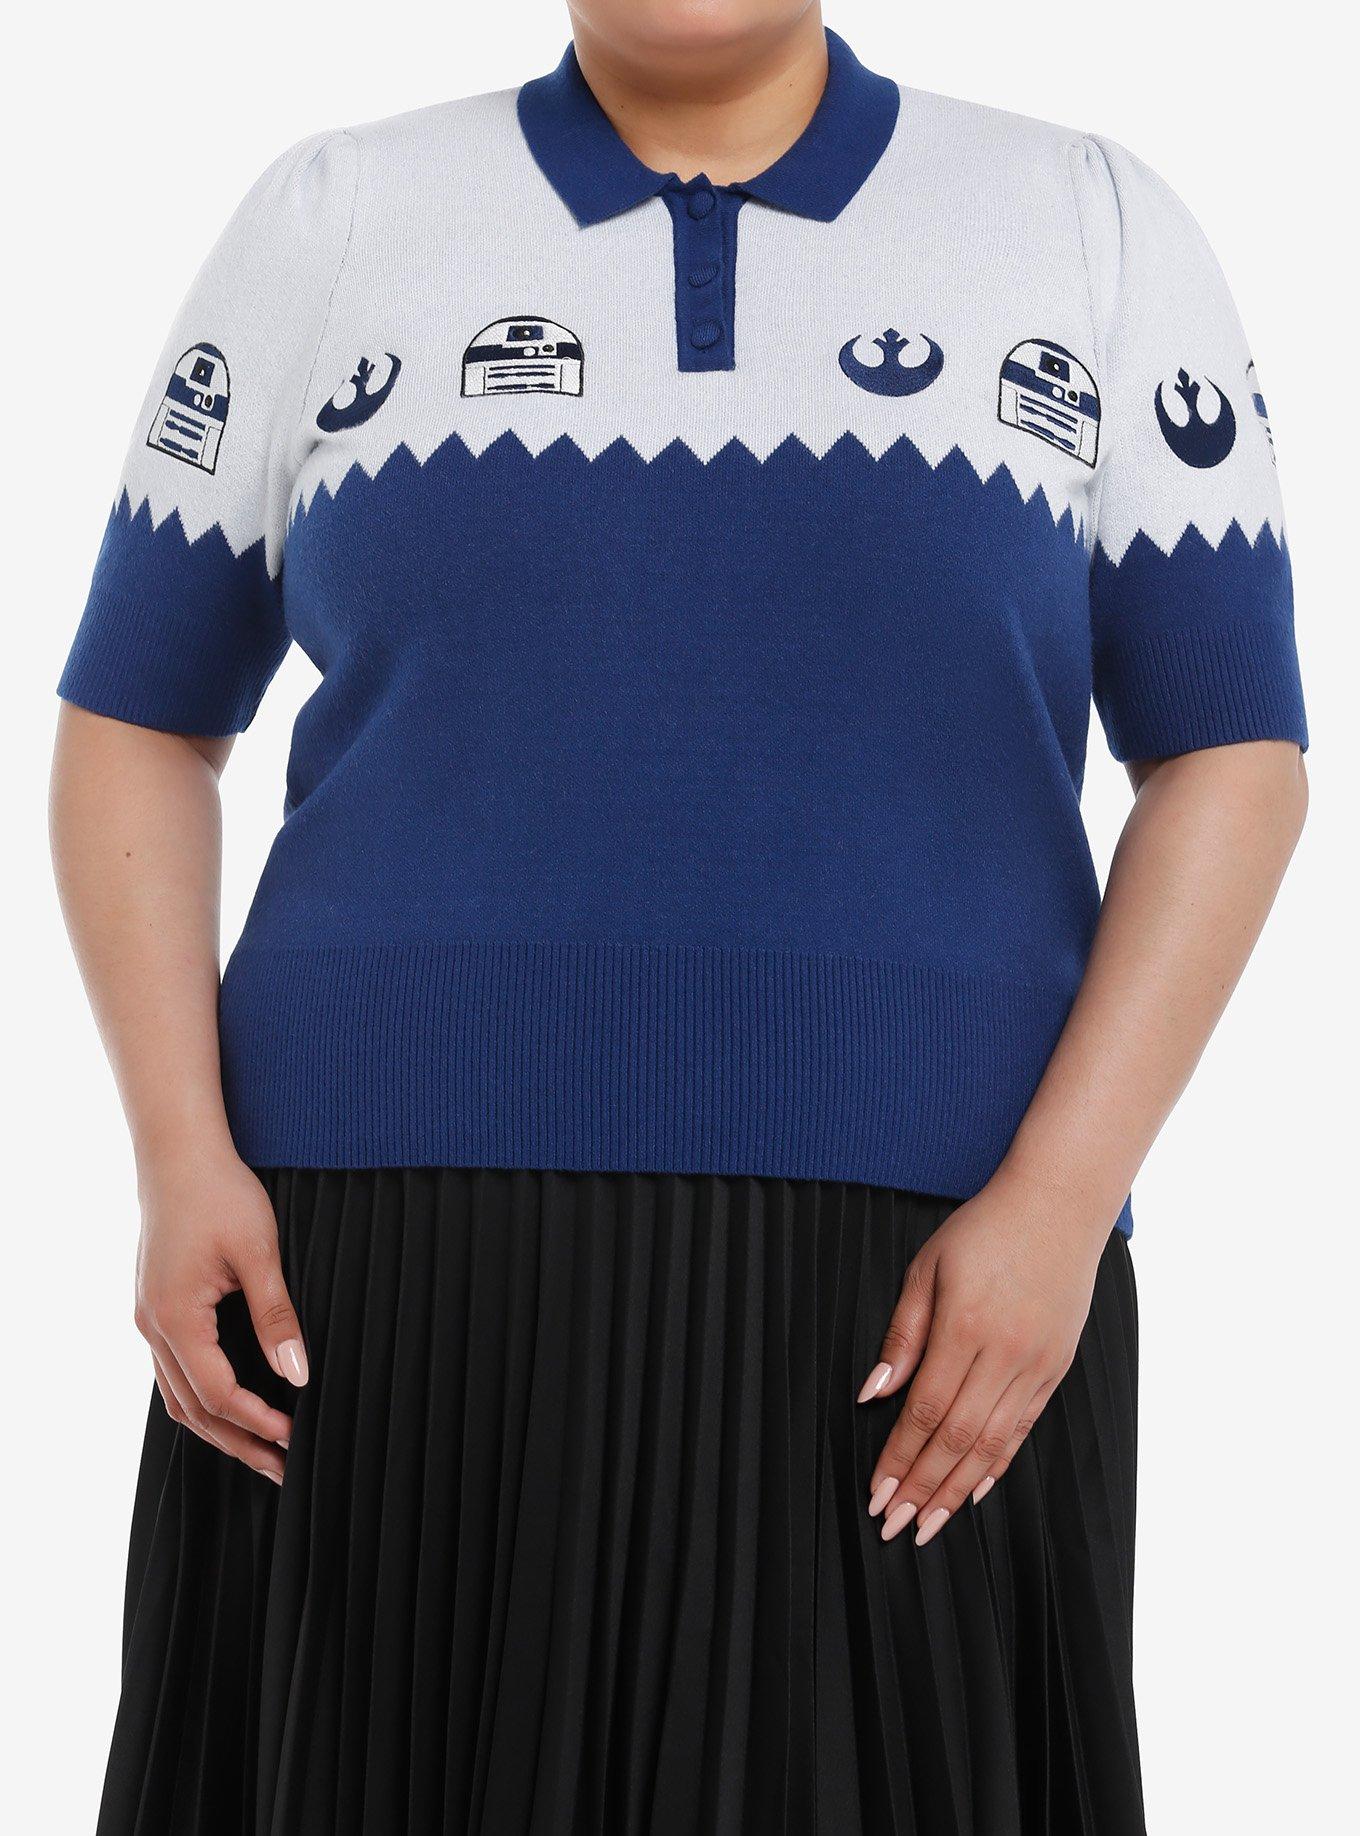 Her Universe Star Wars Rebel Droid Sweater Top Plus Size Her Universe Exclusive, BLUE  WHITE, hi-res